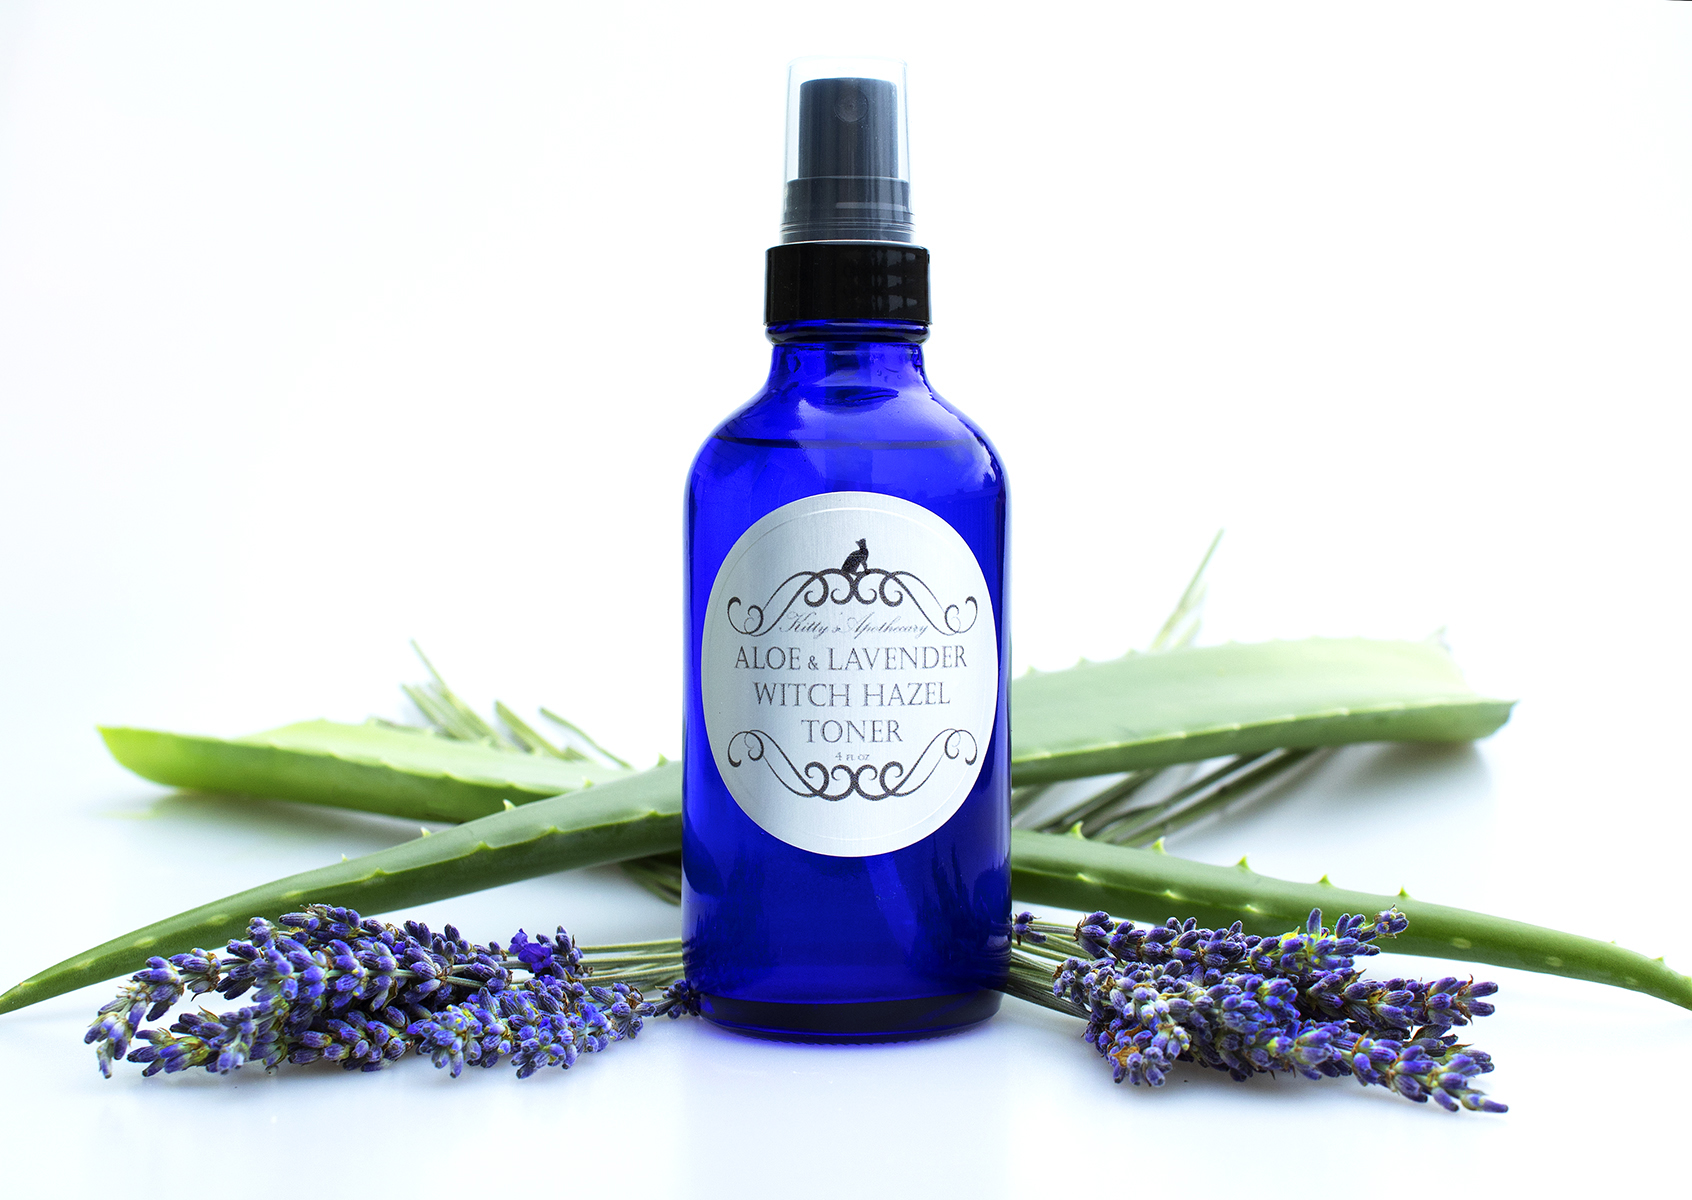 Herbal Witch Hazel and Lavender Facial Toner Spray